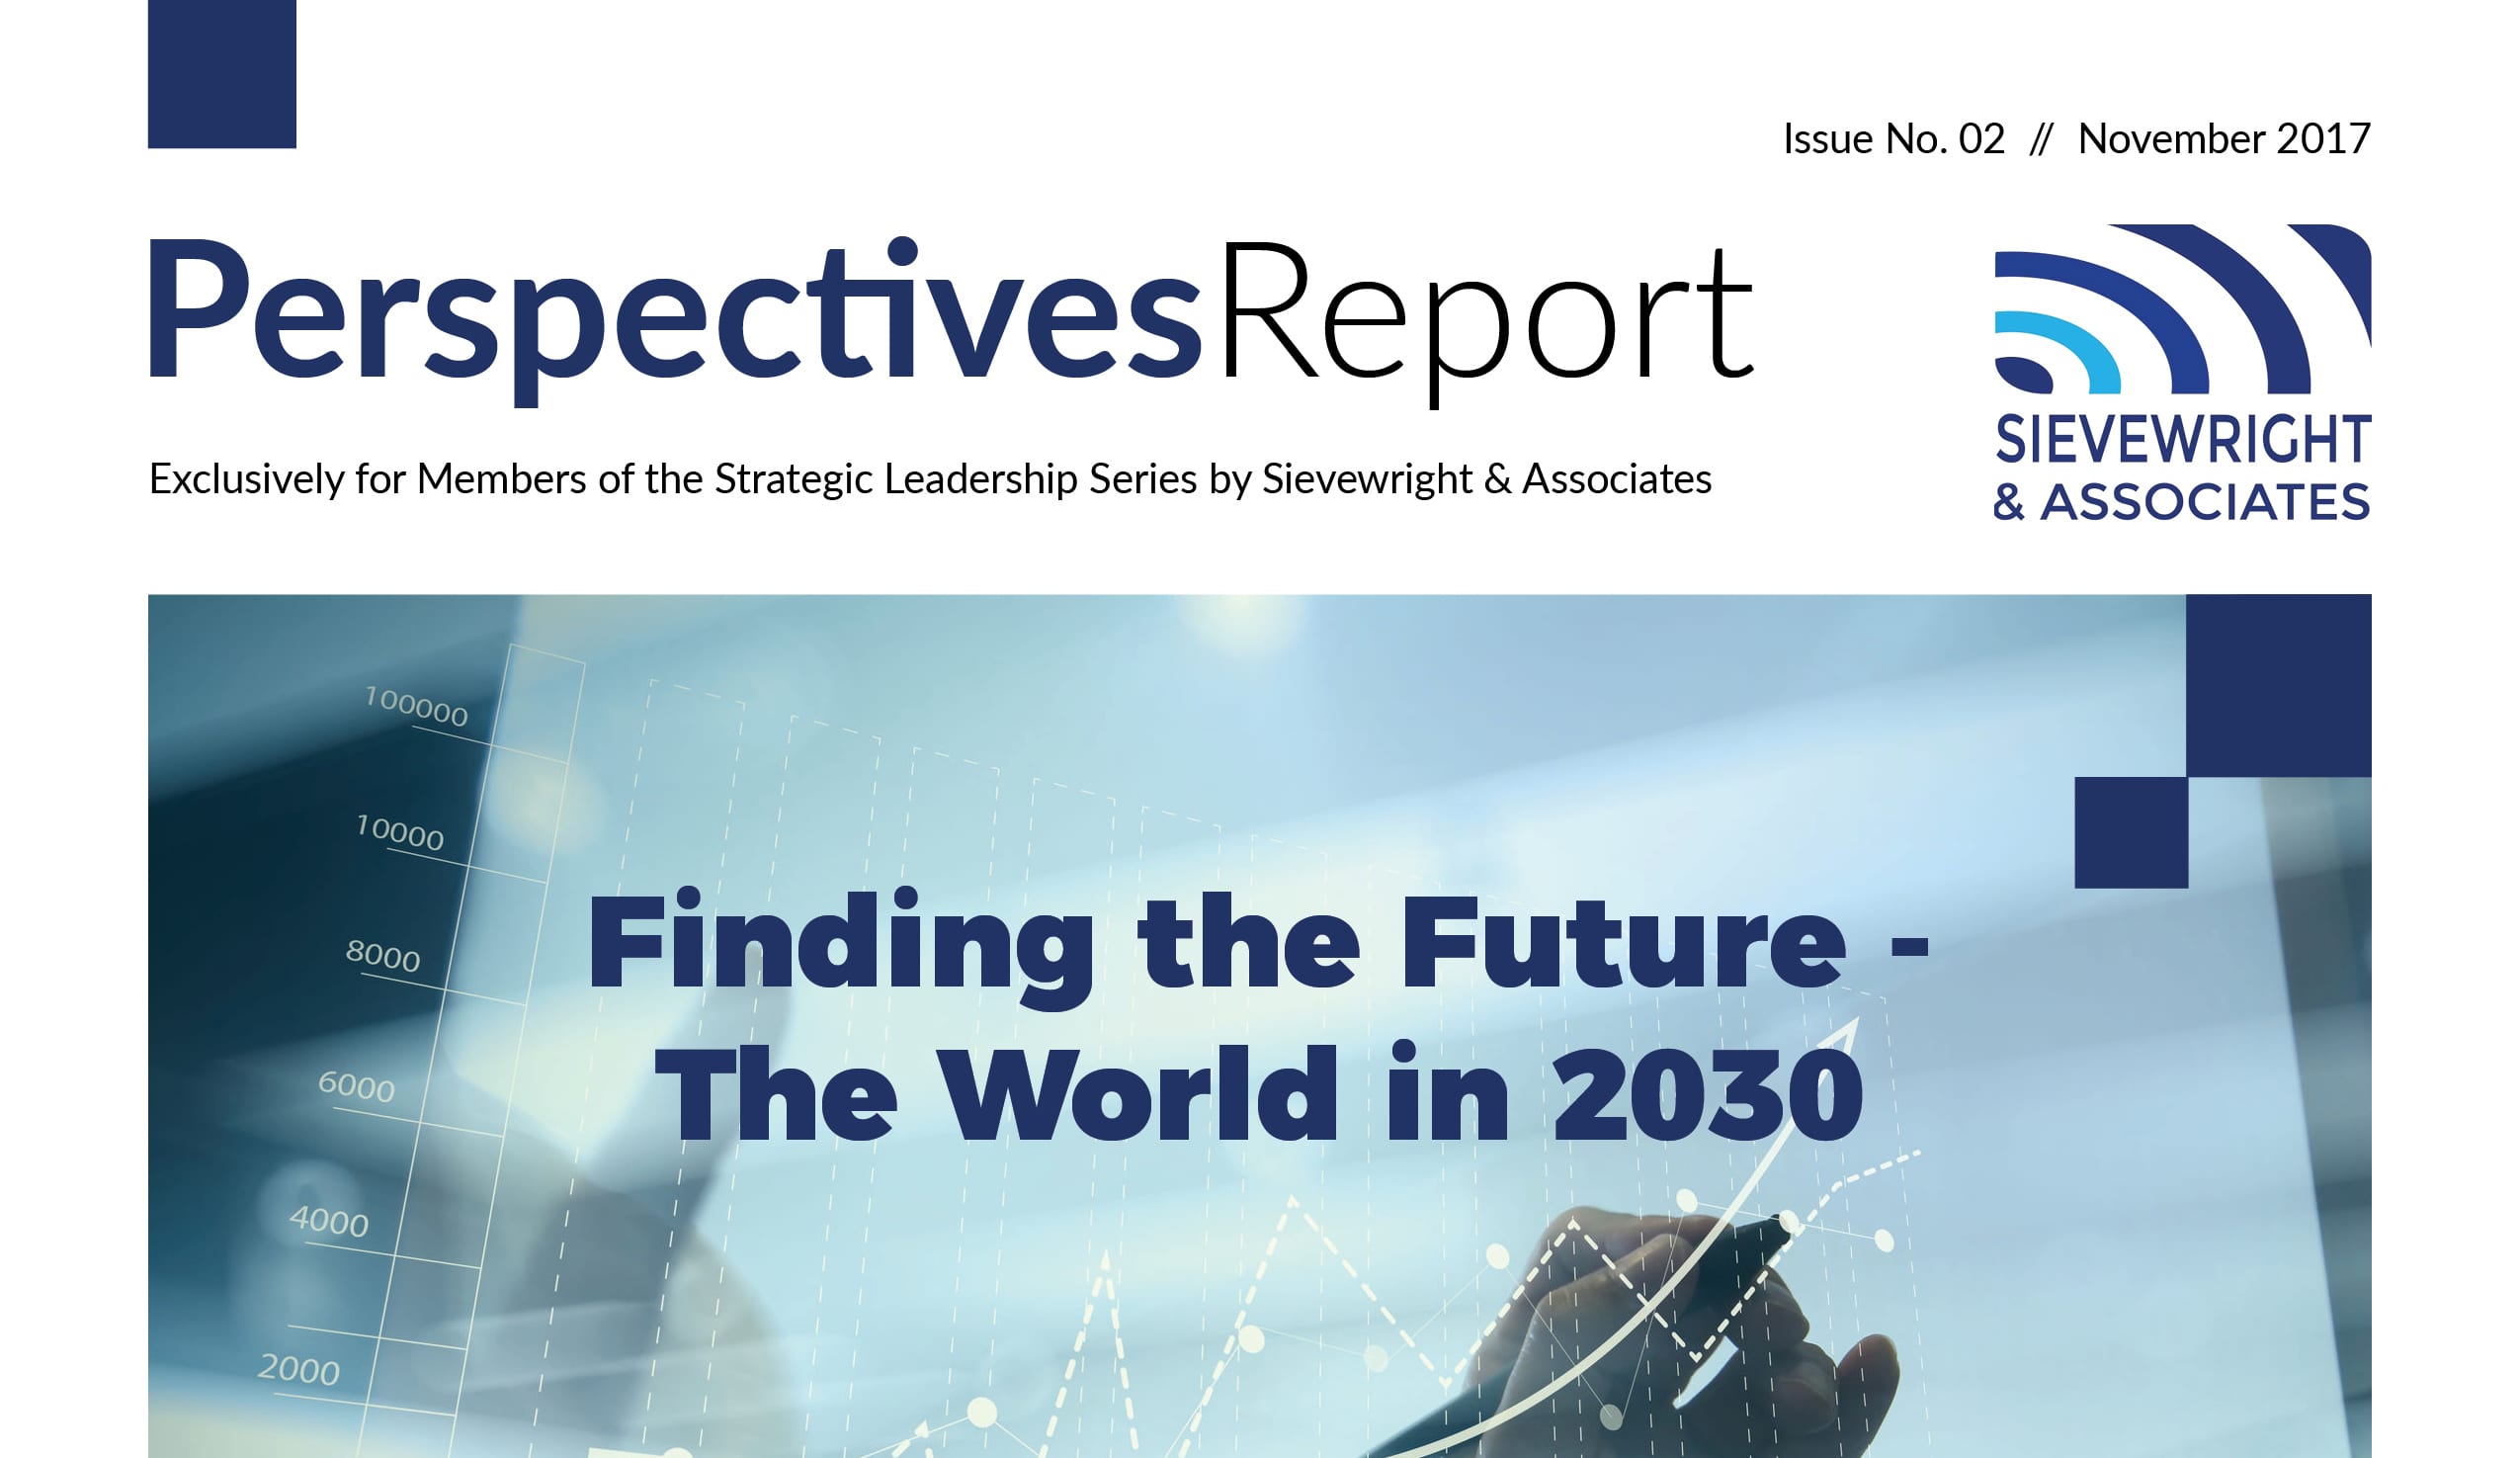 Perspectives Report Cover Image November 2017